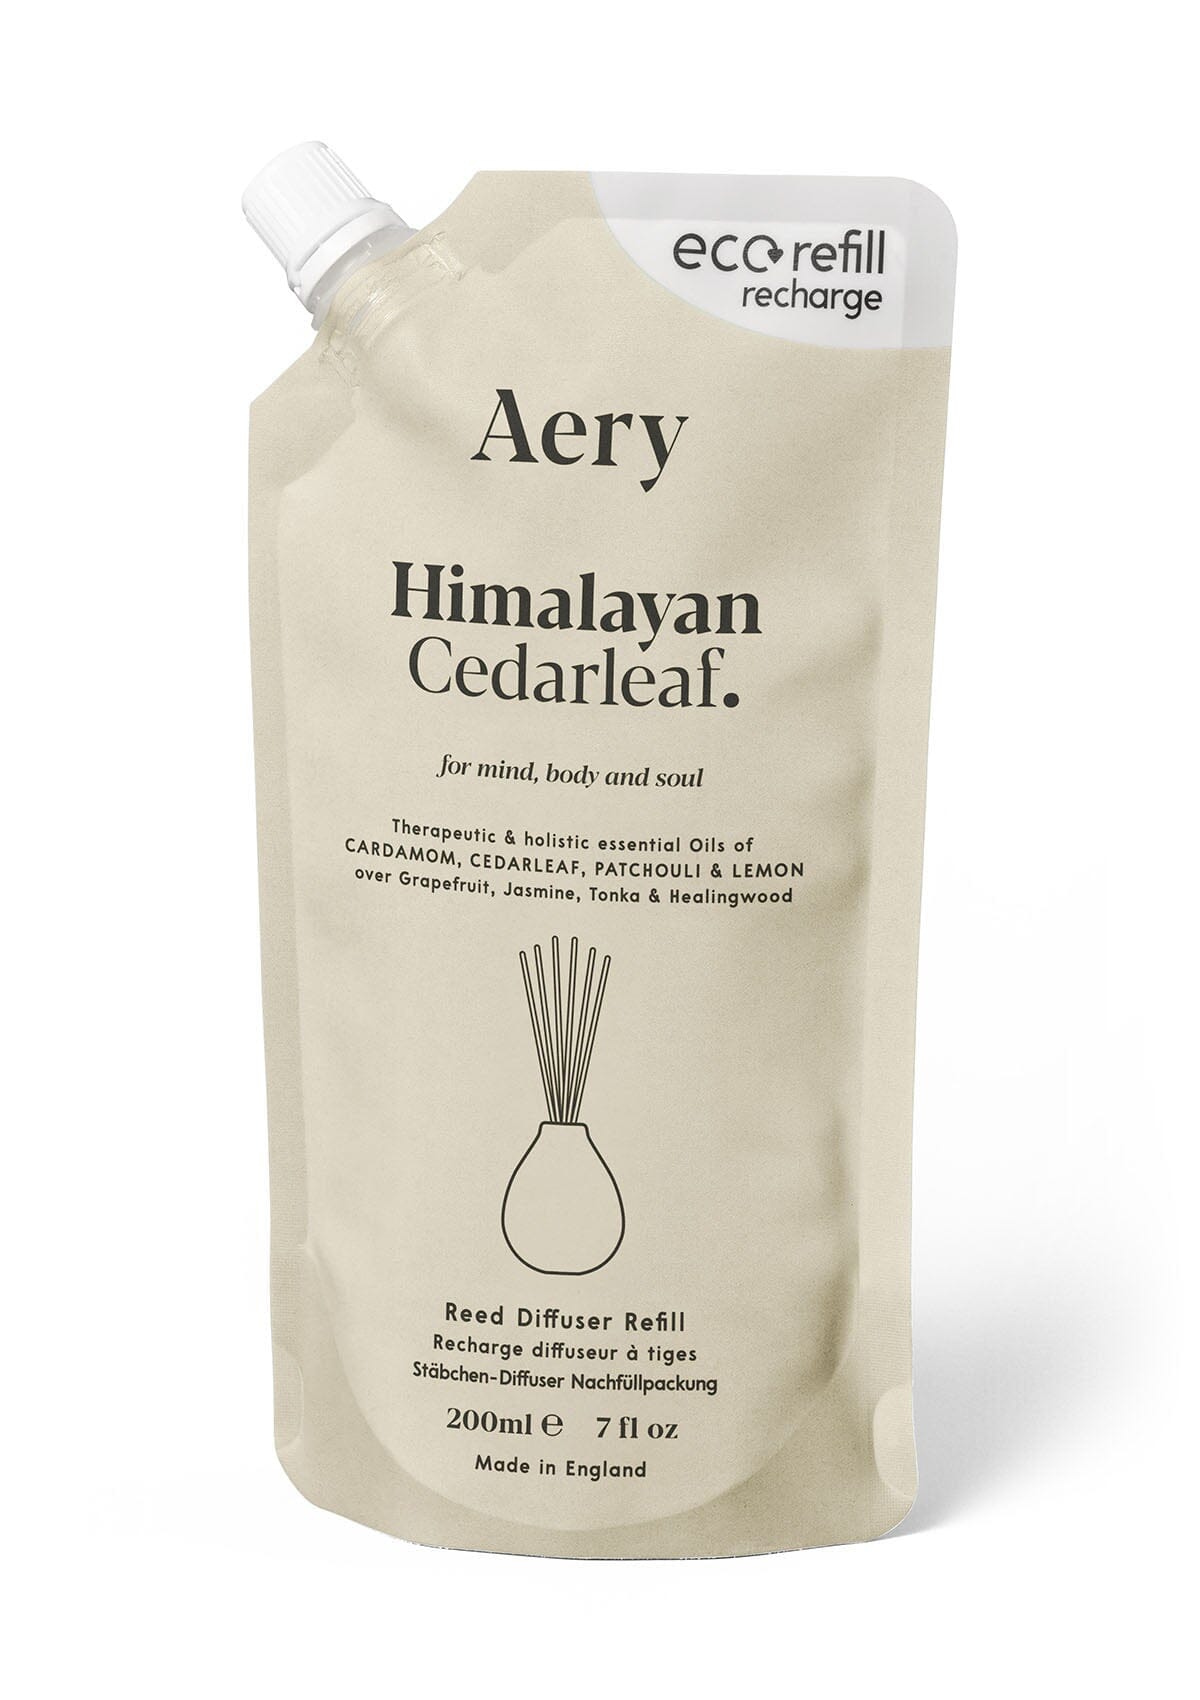 Cream Himalayan Cedarleaf diffuser refill pouch by aery displayed on white background 